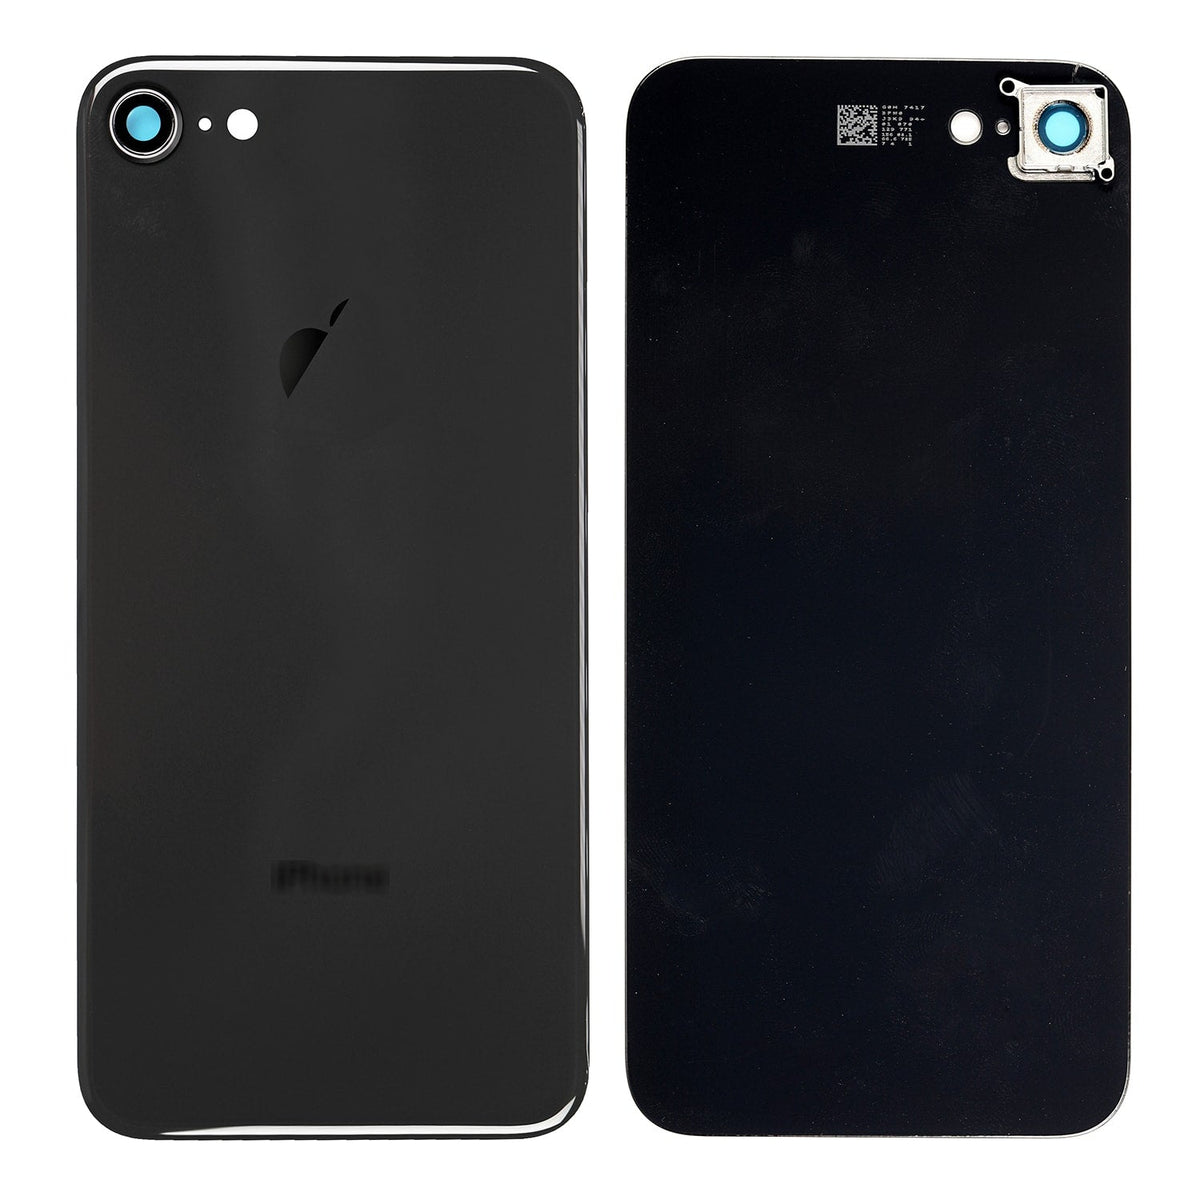 SPACE GRAY BACK COVER WITH CAMERA HOLDER FOR IPHONE 8